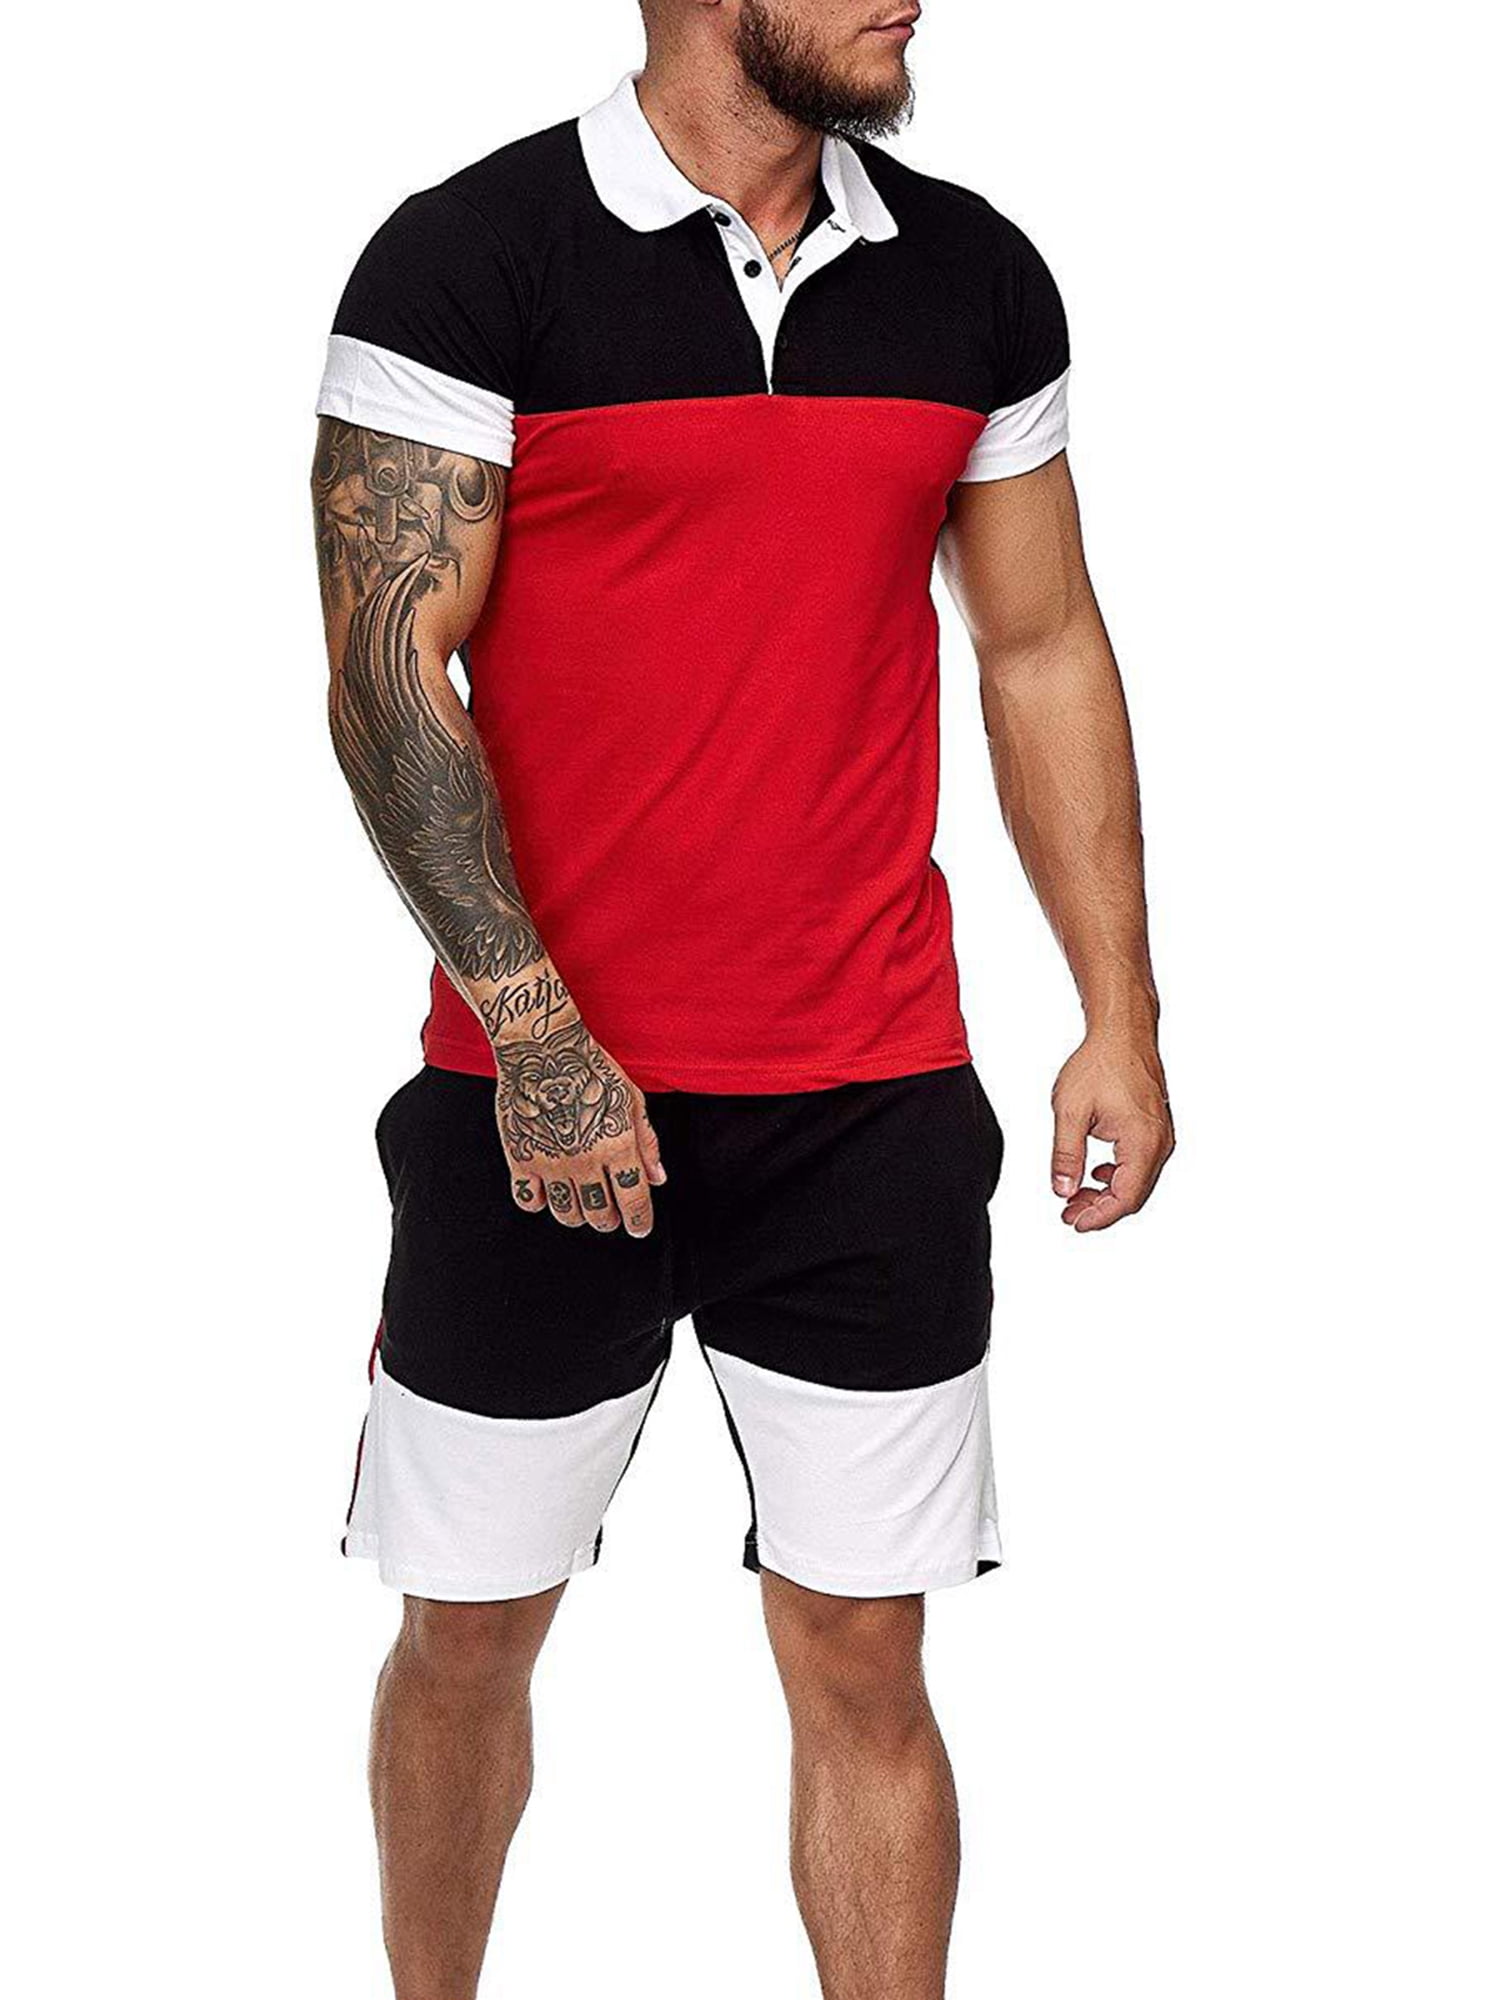 Men's Shorts Set 2 Pieces Outfits Sport Set Short Sleeve T-shirt and Shorts Tracksuit 